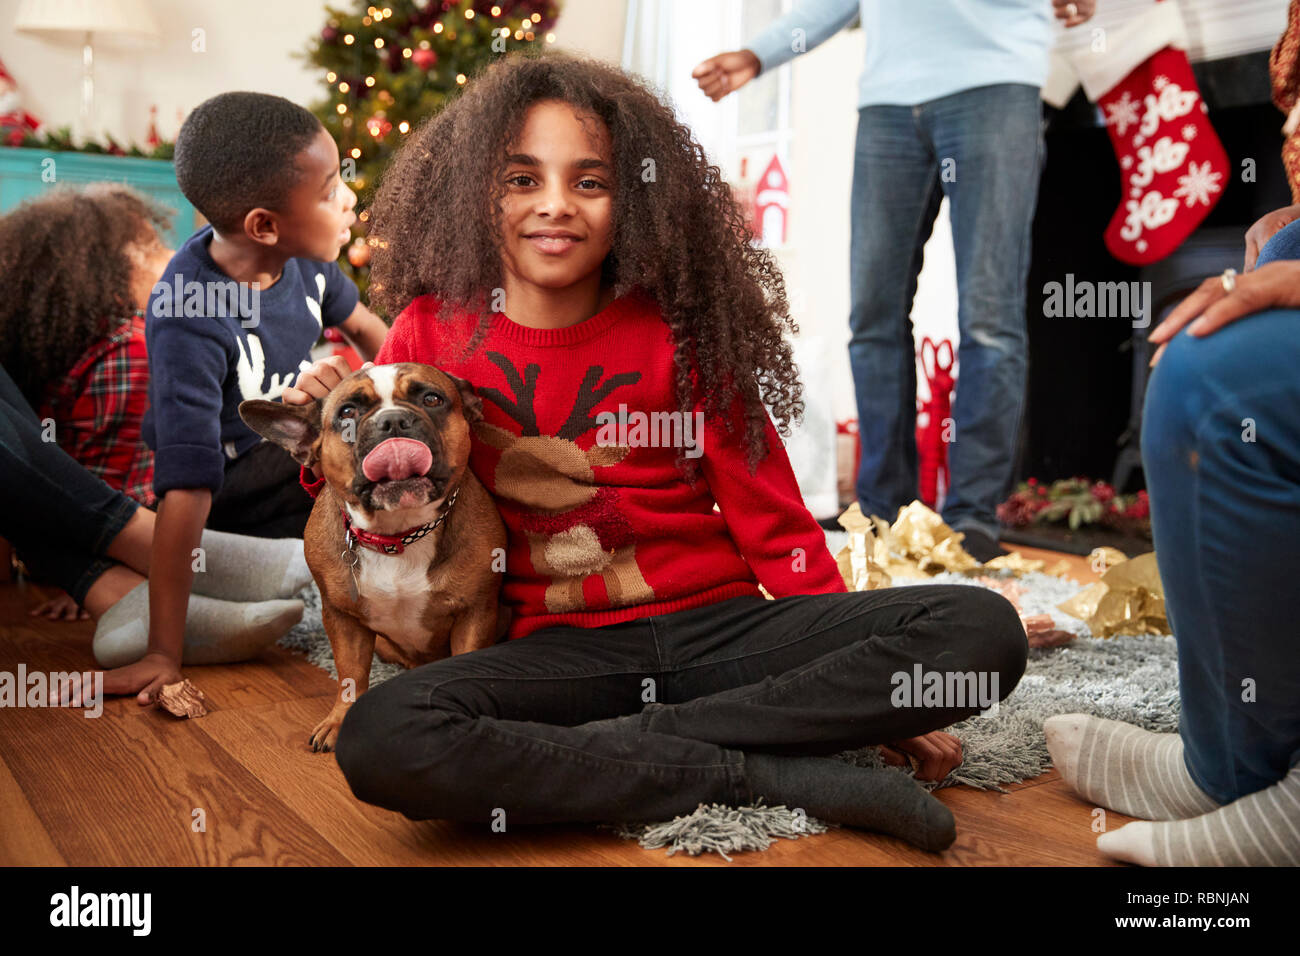 Portrait Of Girl With Pet French Bulldog Celebrating Family Christmas At Home Together Stock Photo